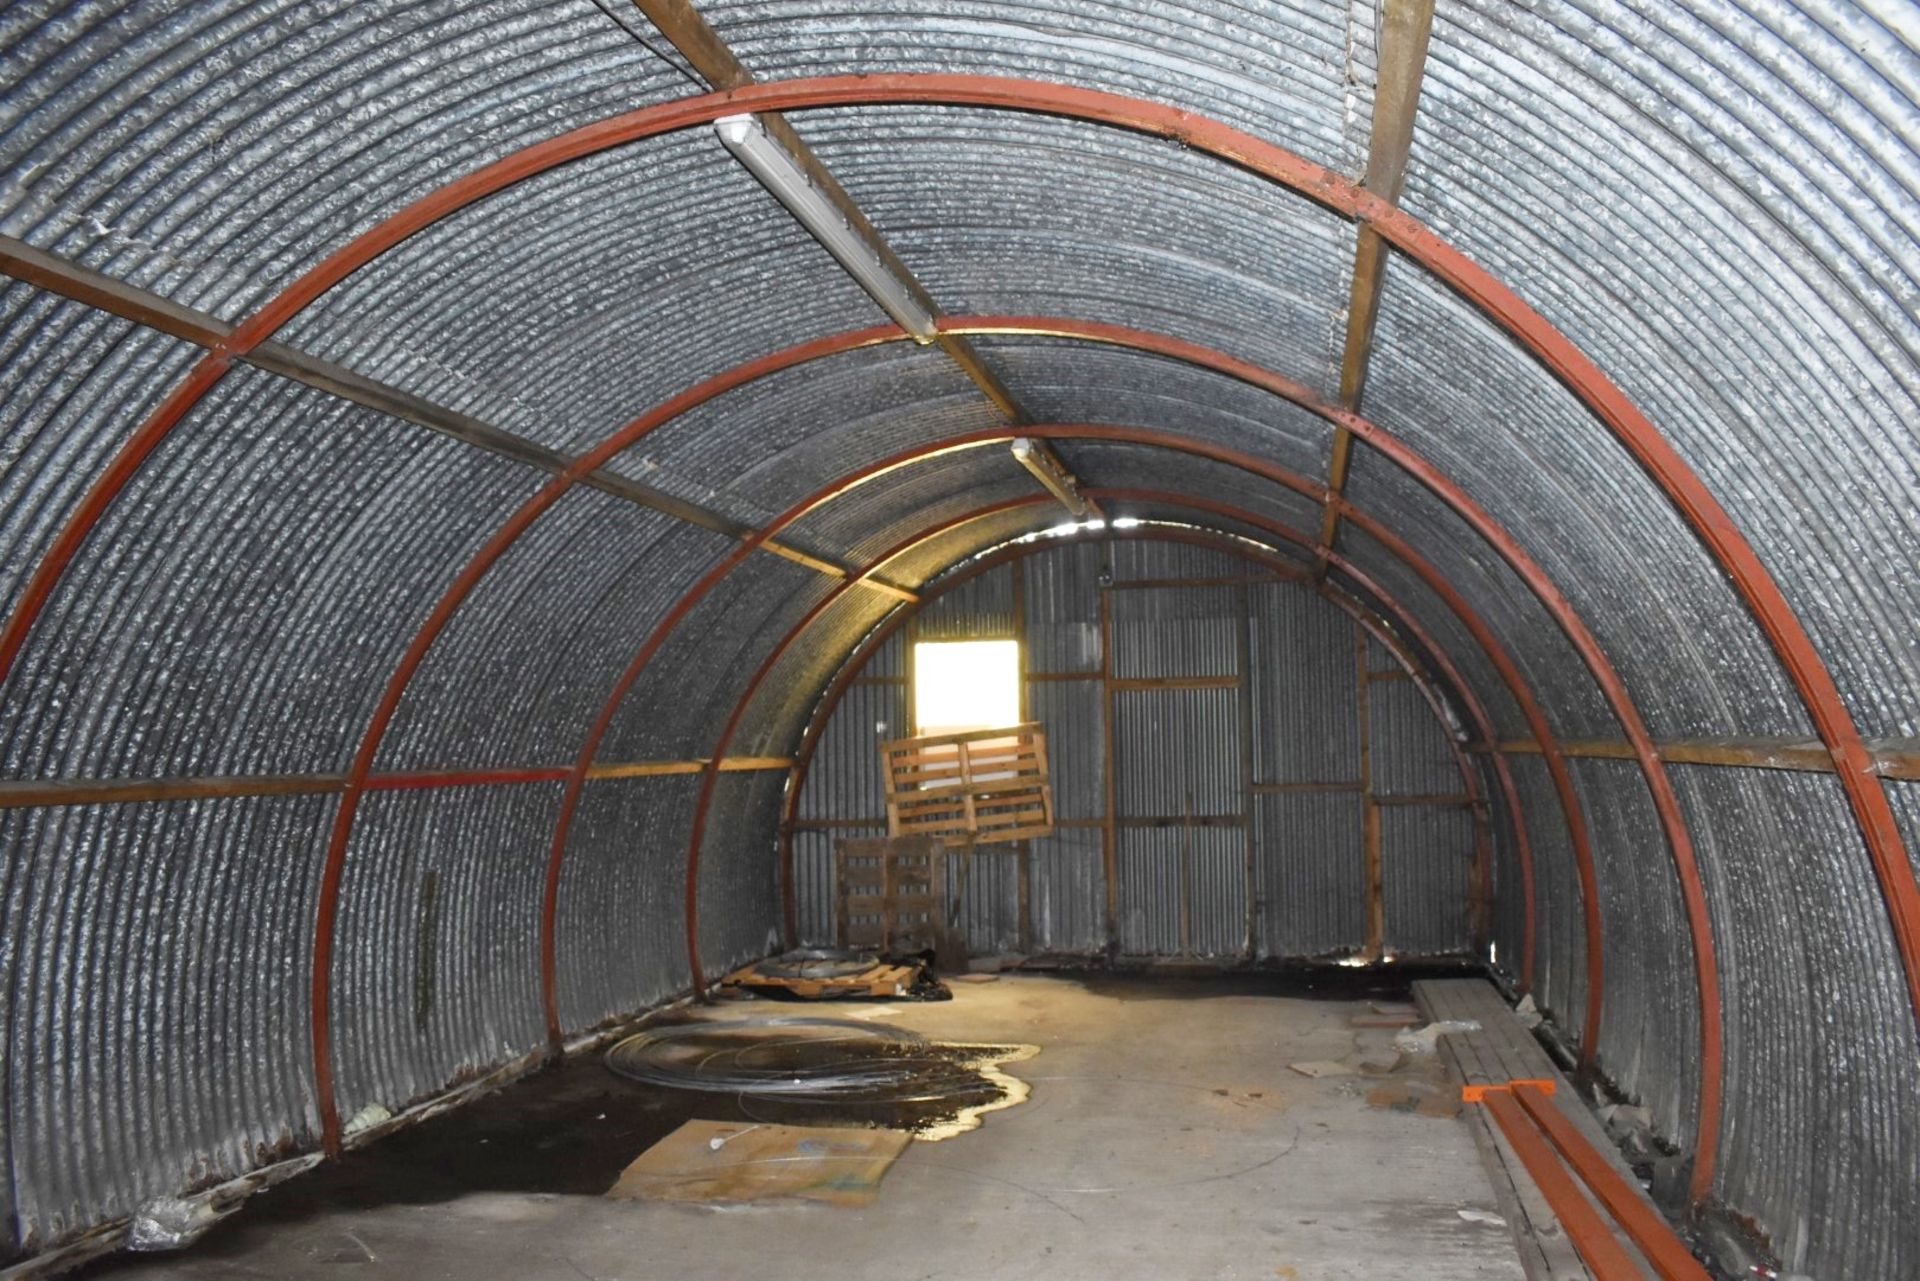 1 x Quonset Storage Building With Hinged Doors - Lightweight Steel Structure - H318 x L1110 x W500 - Image 3 of 9